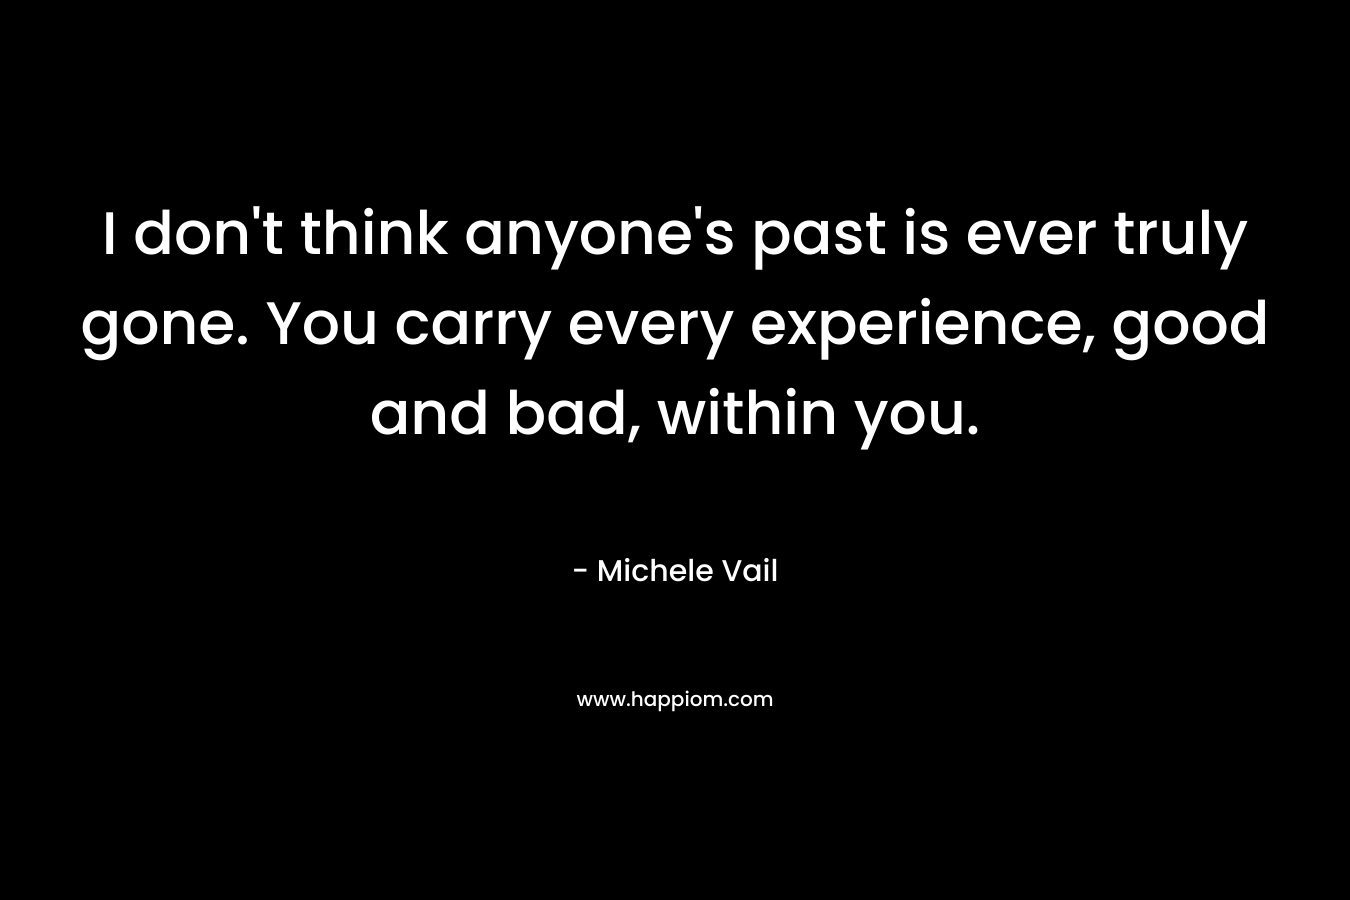 I don’t think anyone’s past is ever truly gone. You carry every experience, good and bad, within you. – Michele Vail